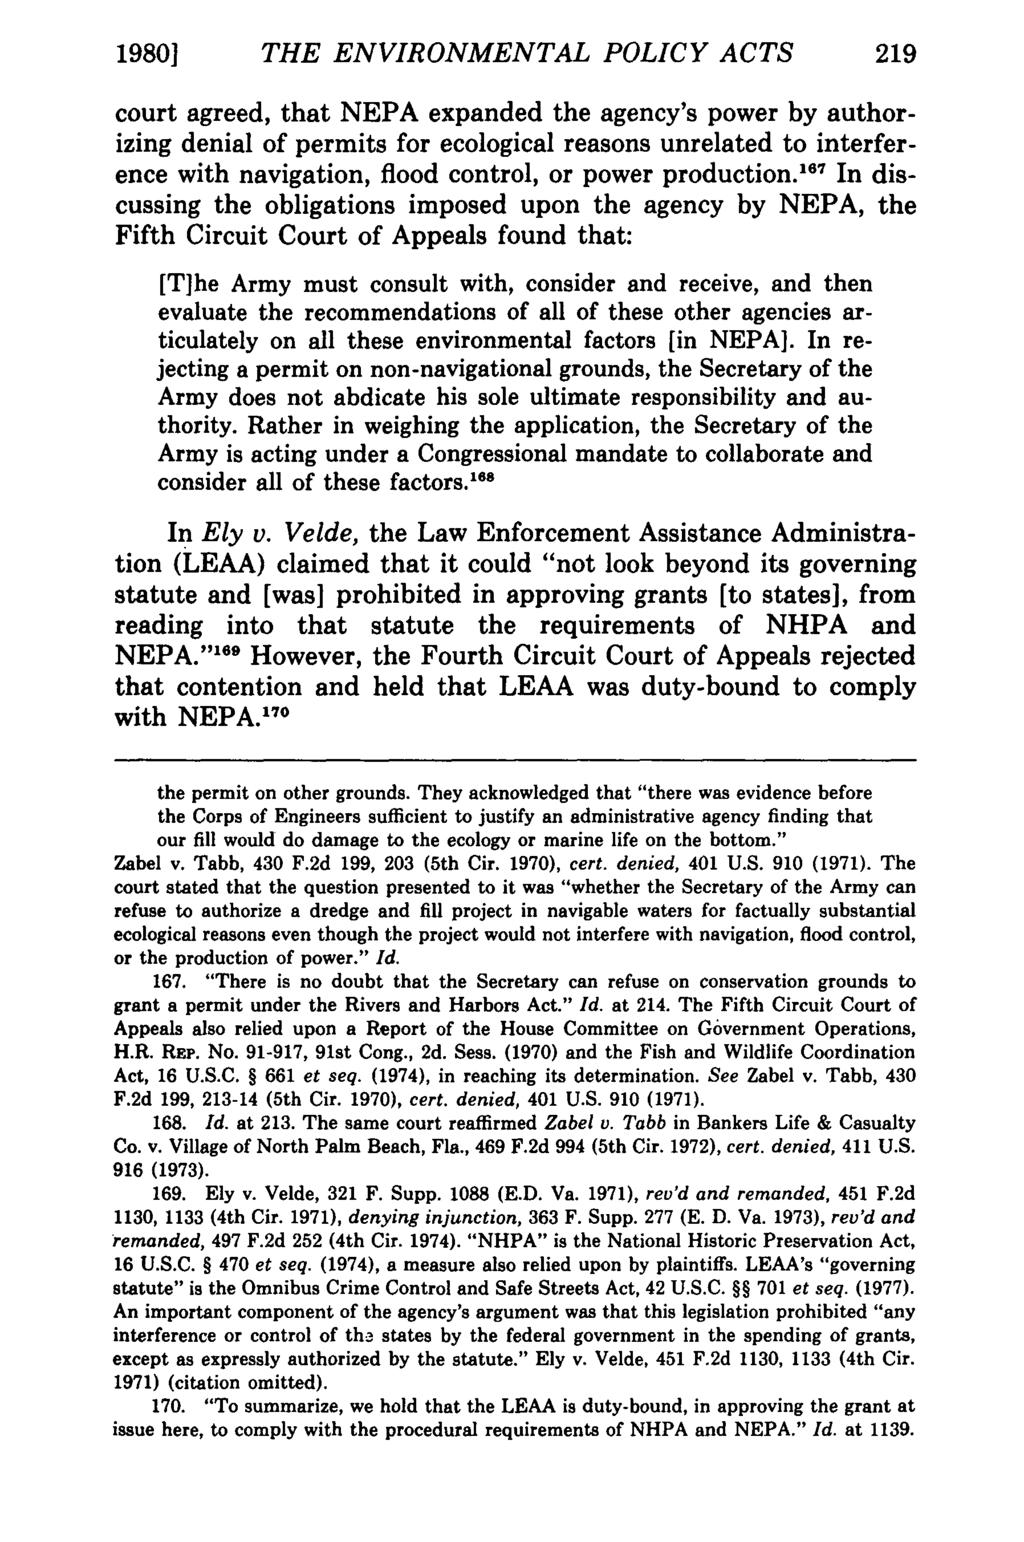 1980] THE ENVIRONMENT AL POLICY ACTS 219 court agreed, that NEPA expanded the agency's power by authorizing denial of permits for ecological reasons unrelated to interference with navigation, flood